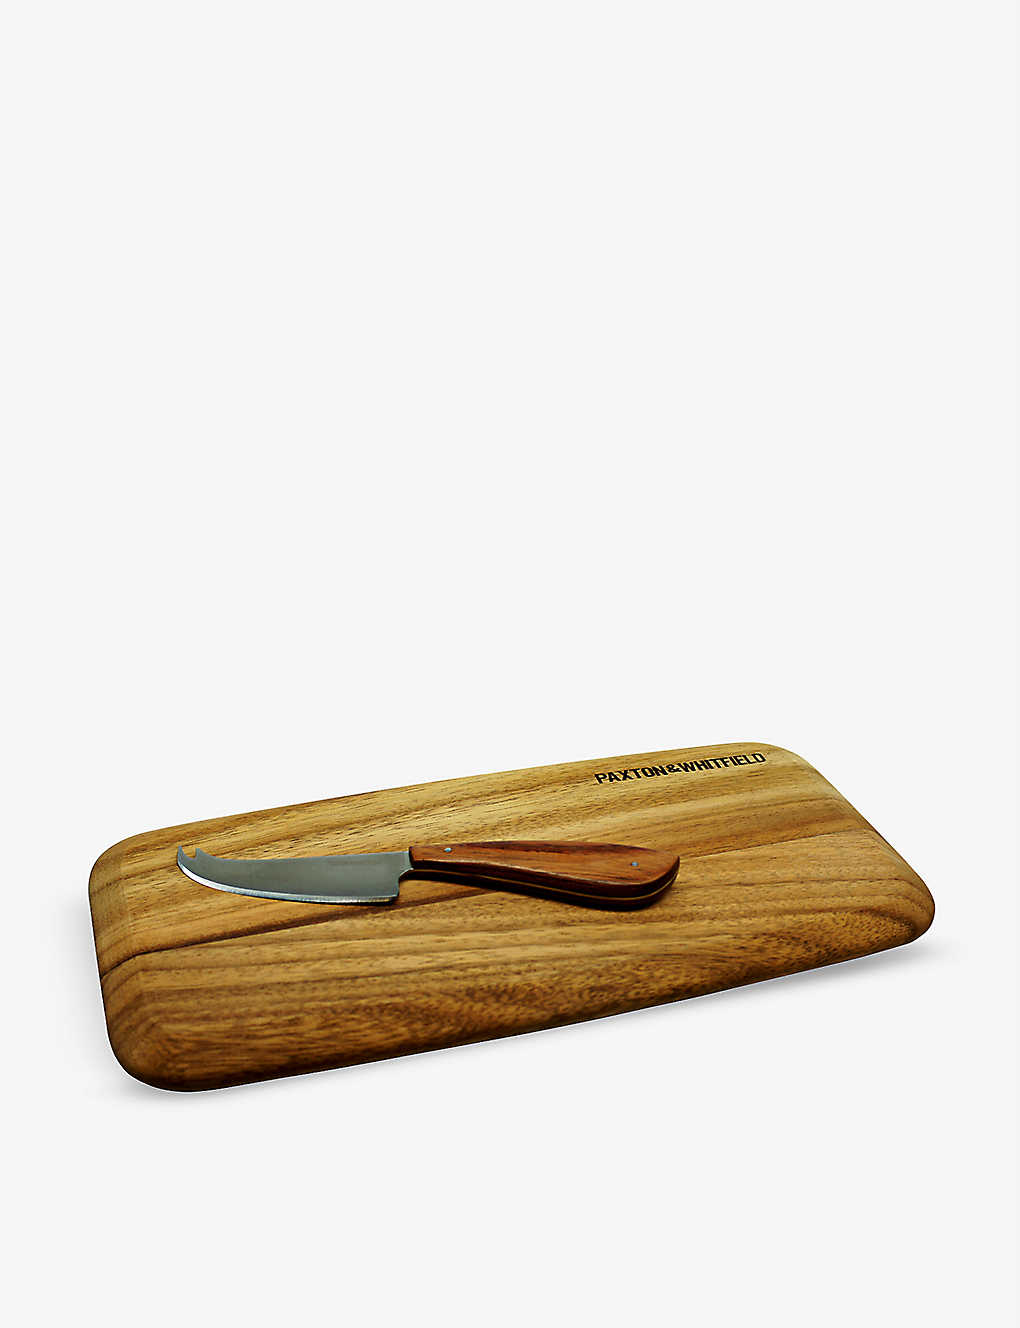 PAXTON & WHITFIELD グレインド 木製チーズボード&ナイフセット Grained wooden cheese board and knife set